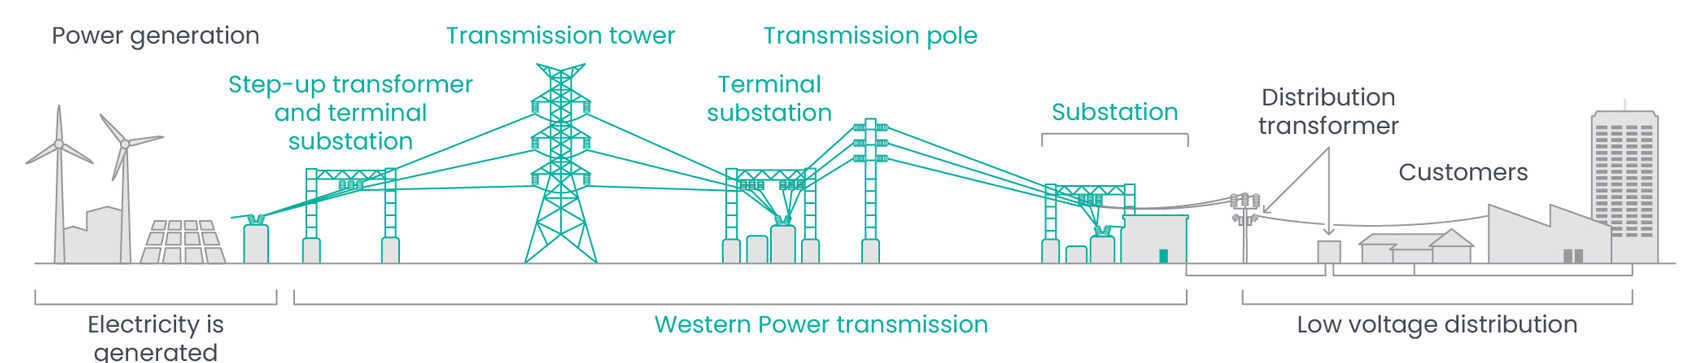 Diagram showing how Western Powers transports electricity